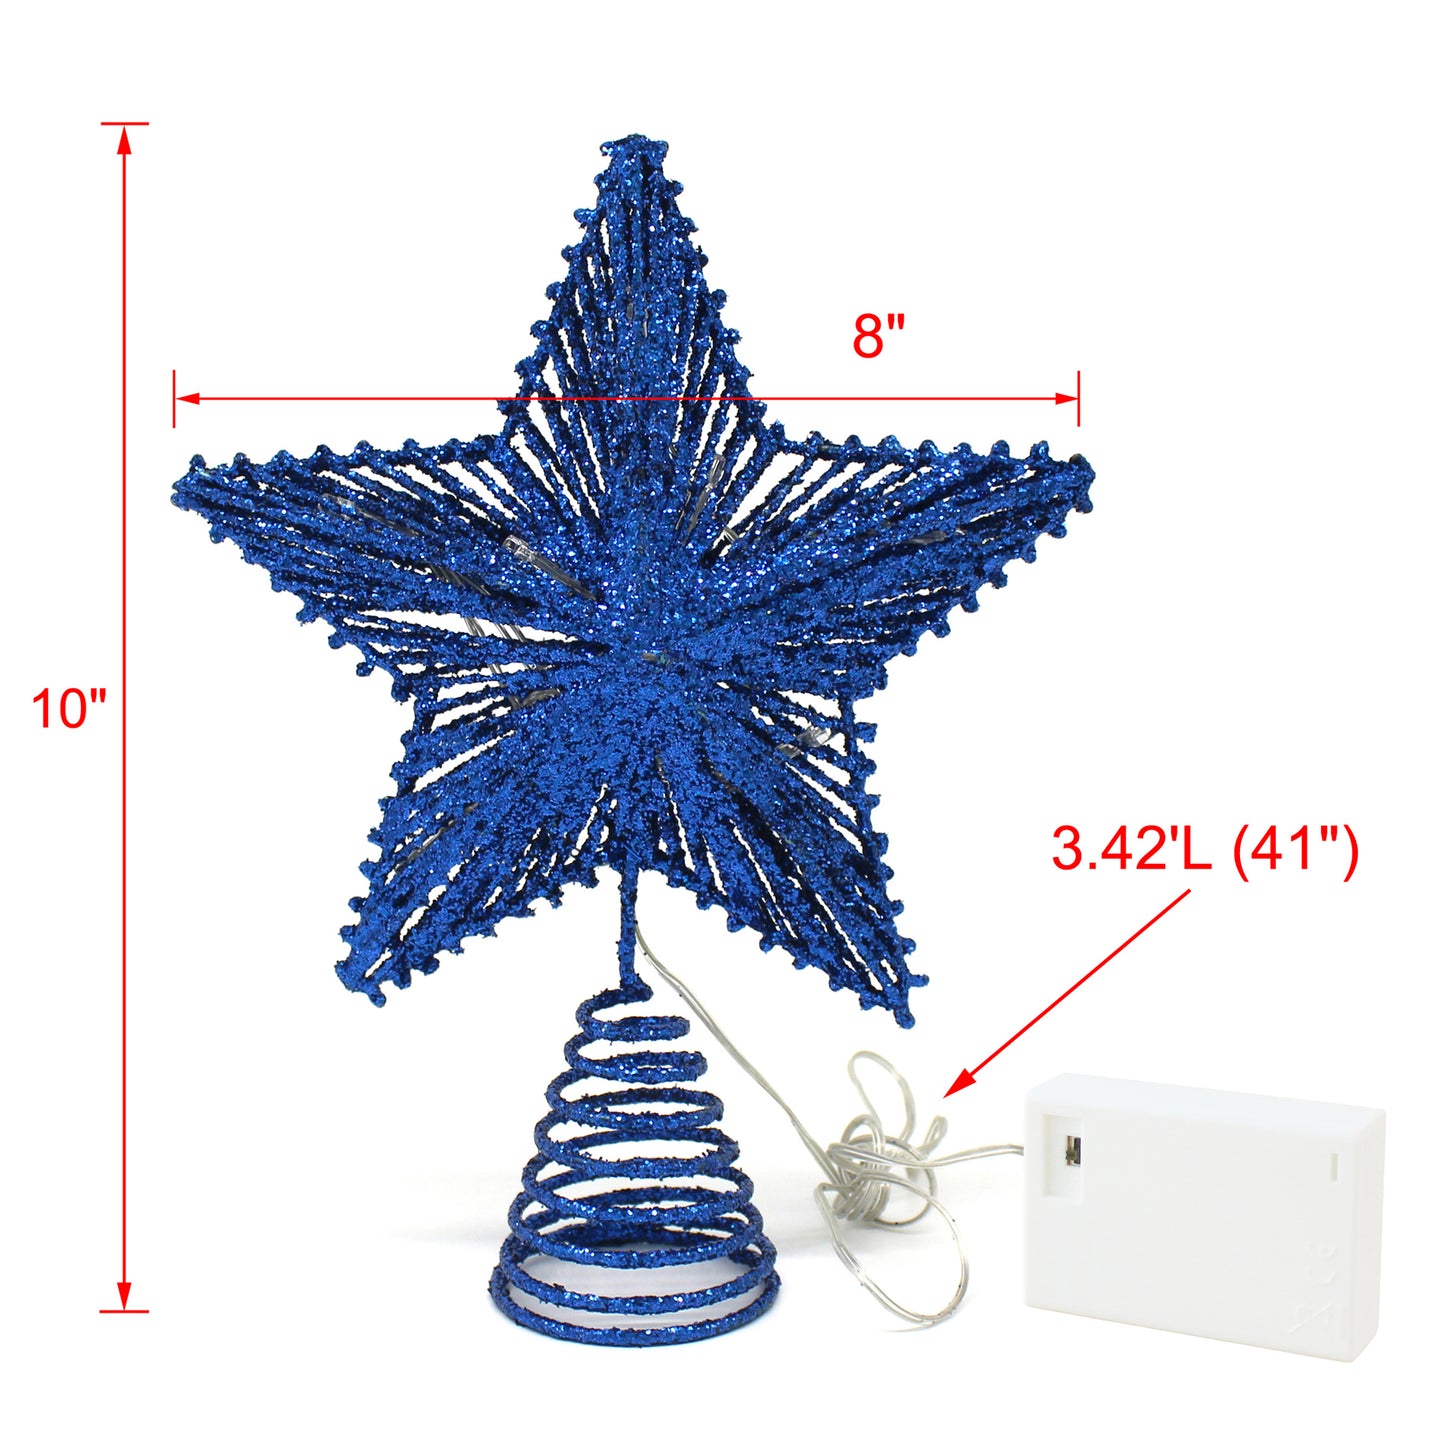 CVHOMEDECO. Blue Glittered 3D Tree Top Star with Warm White LED Lights and timer for Christmas Tree Decoration and Holiday Seasonal Décor, 8 x 10 Inch